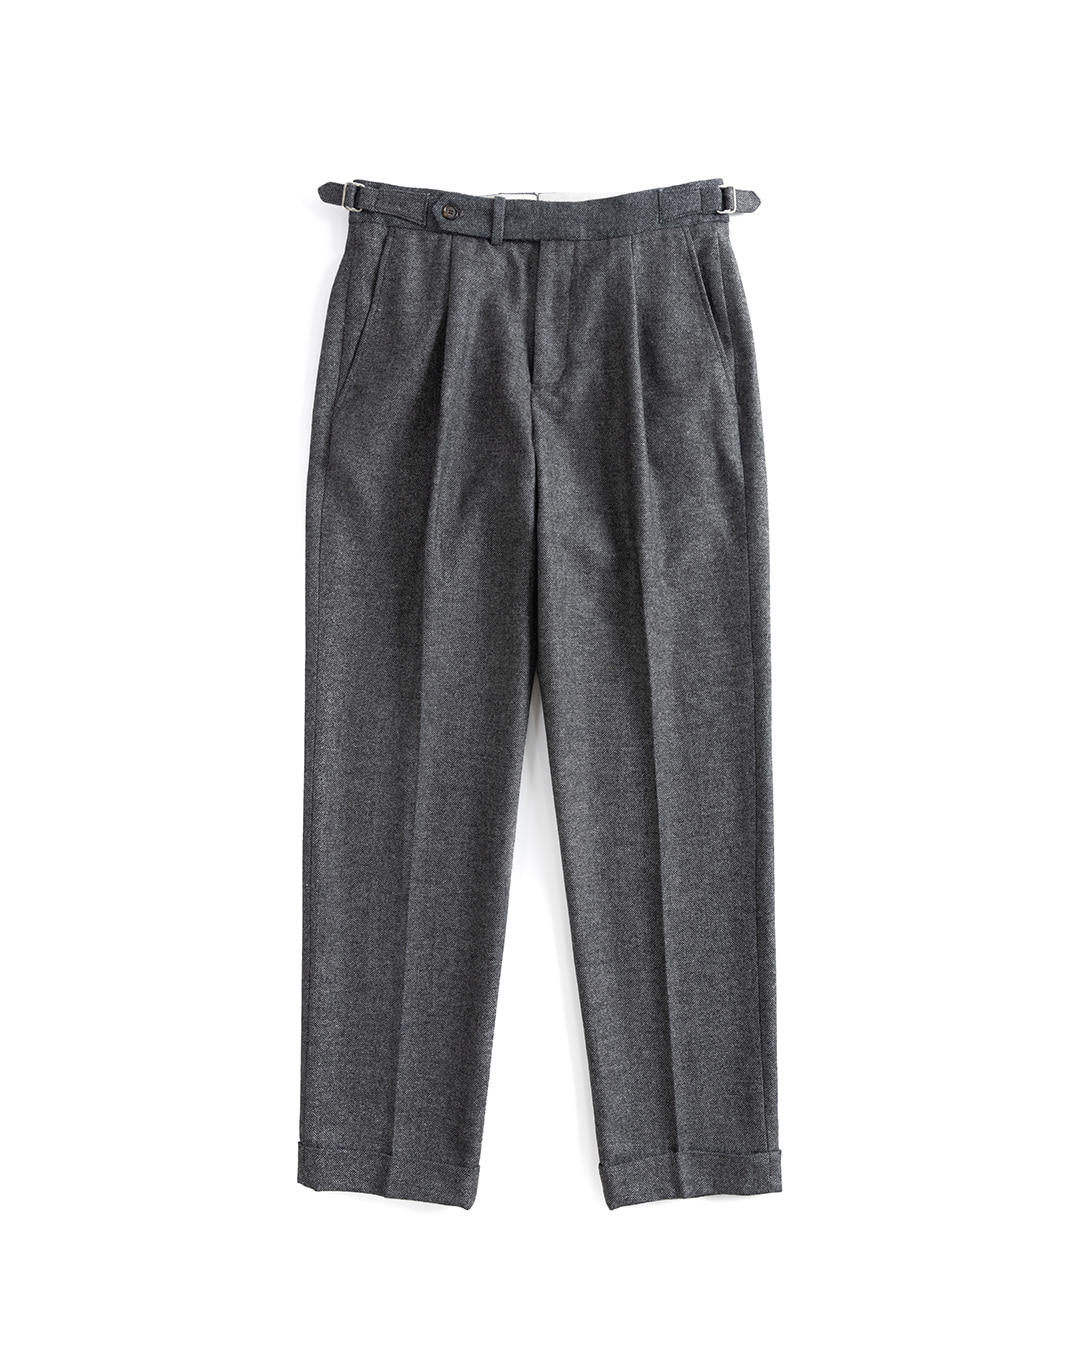 08 TAILORED FIT TROUSERS (grey)